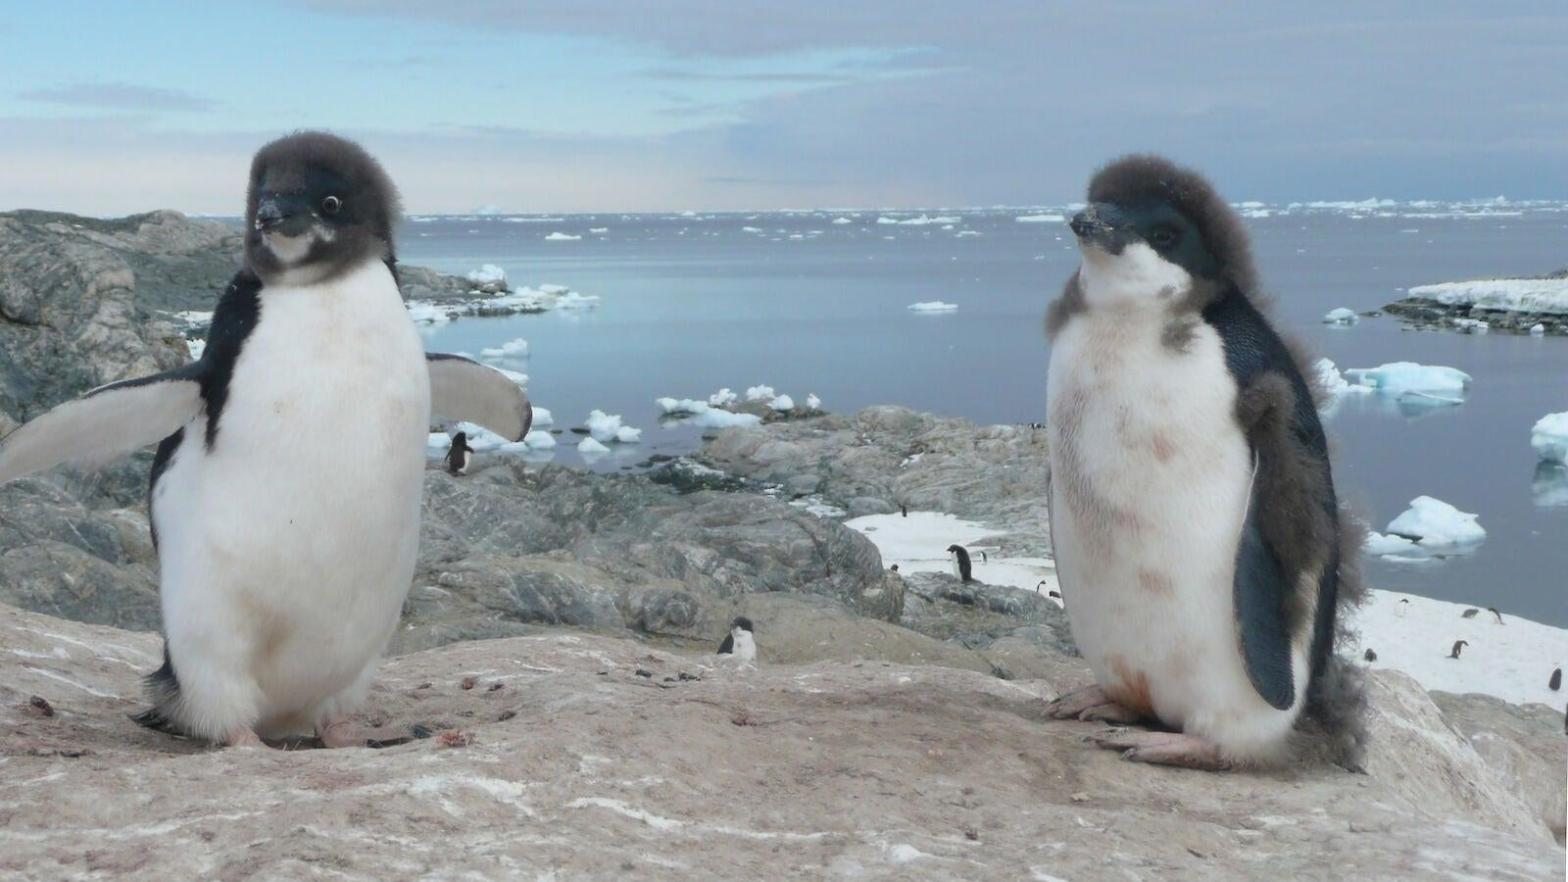 Adélie penguins need an optimal level of sea ice to breed — too much, and access to food is threatened. (Image: Louise Emmerson/Australian Antarctic Program)